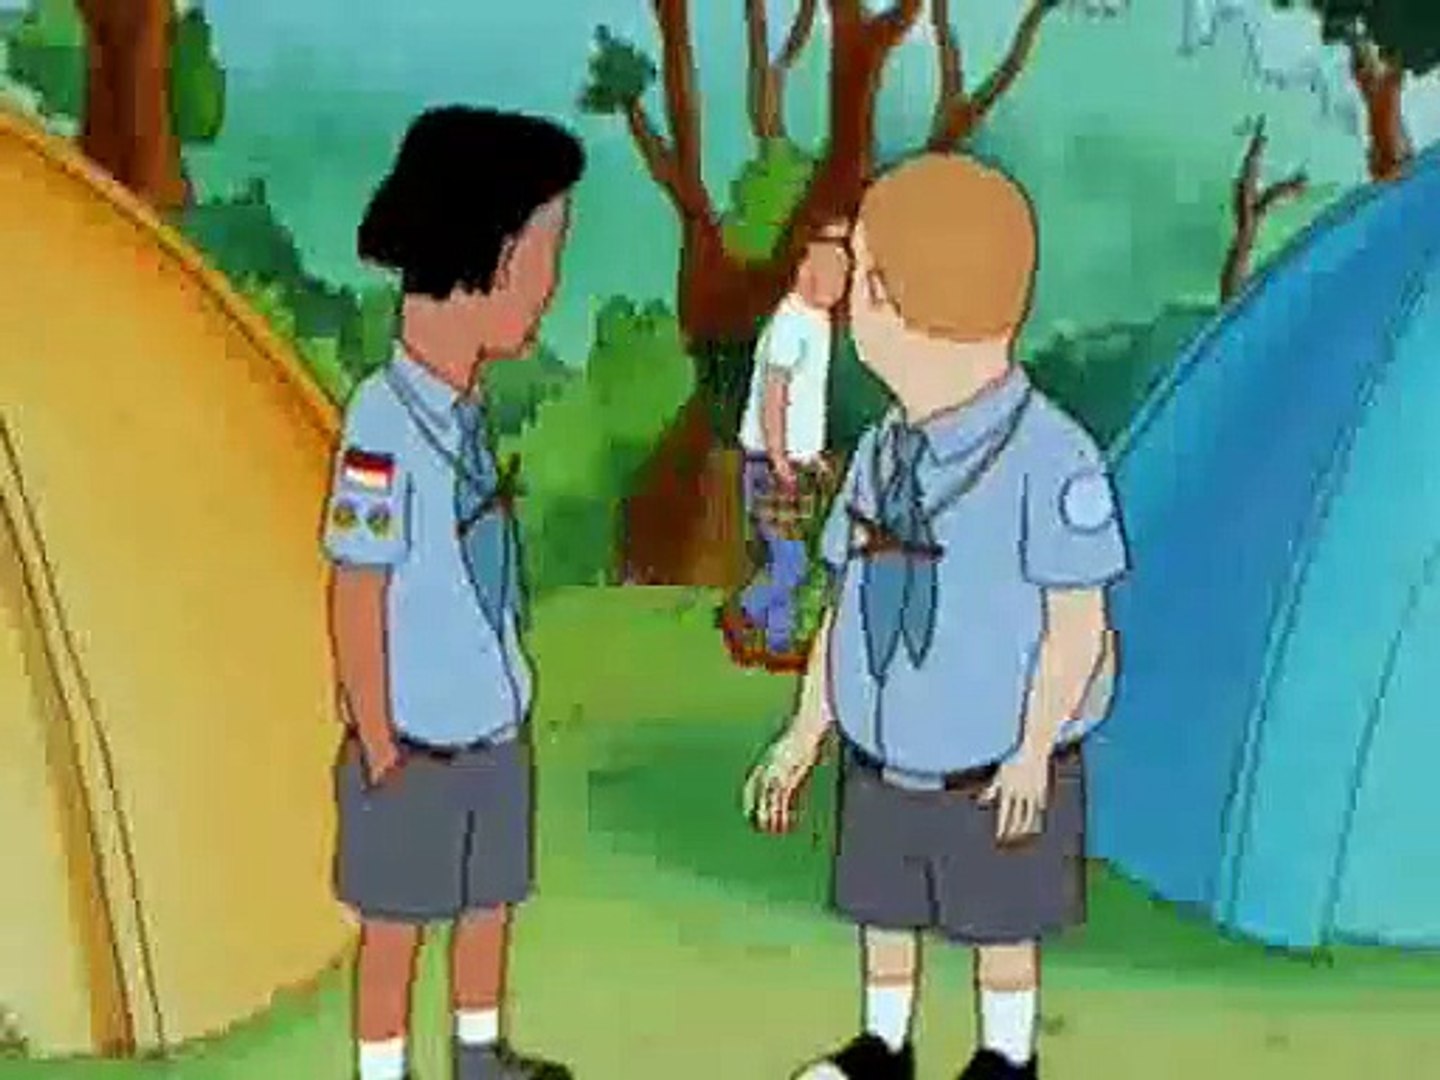 King Of The Hill Season 1 Episode 3 Order Of The Straight Arrow